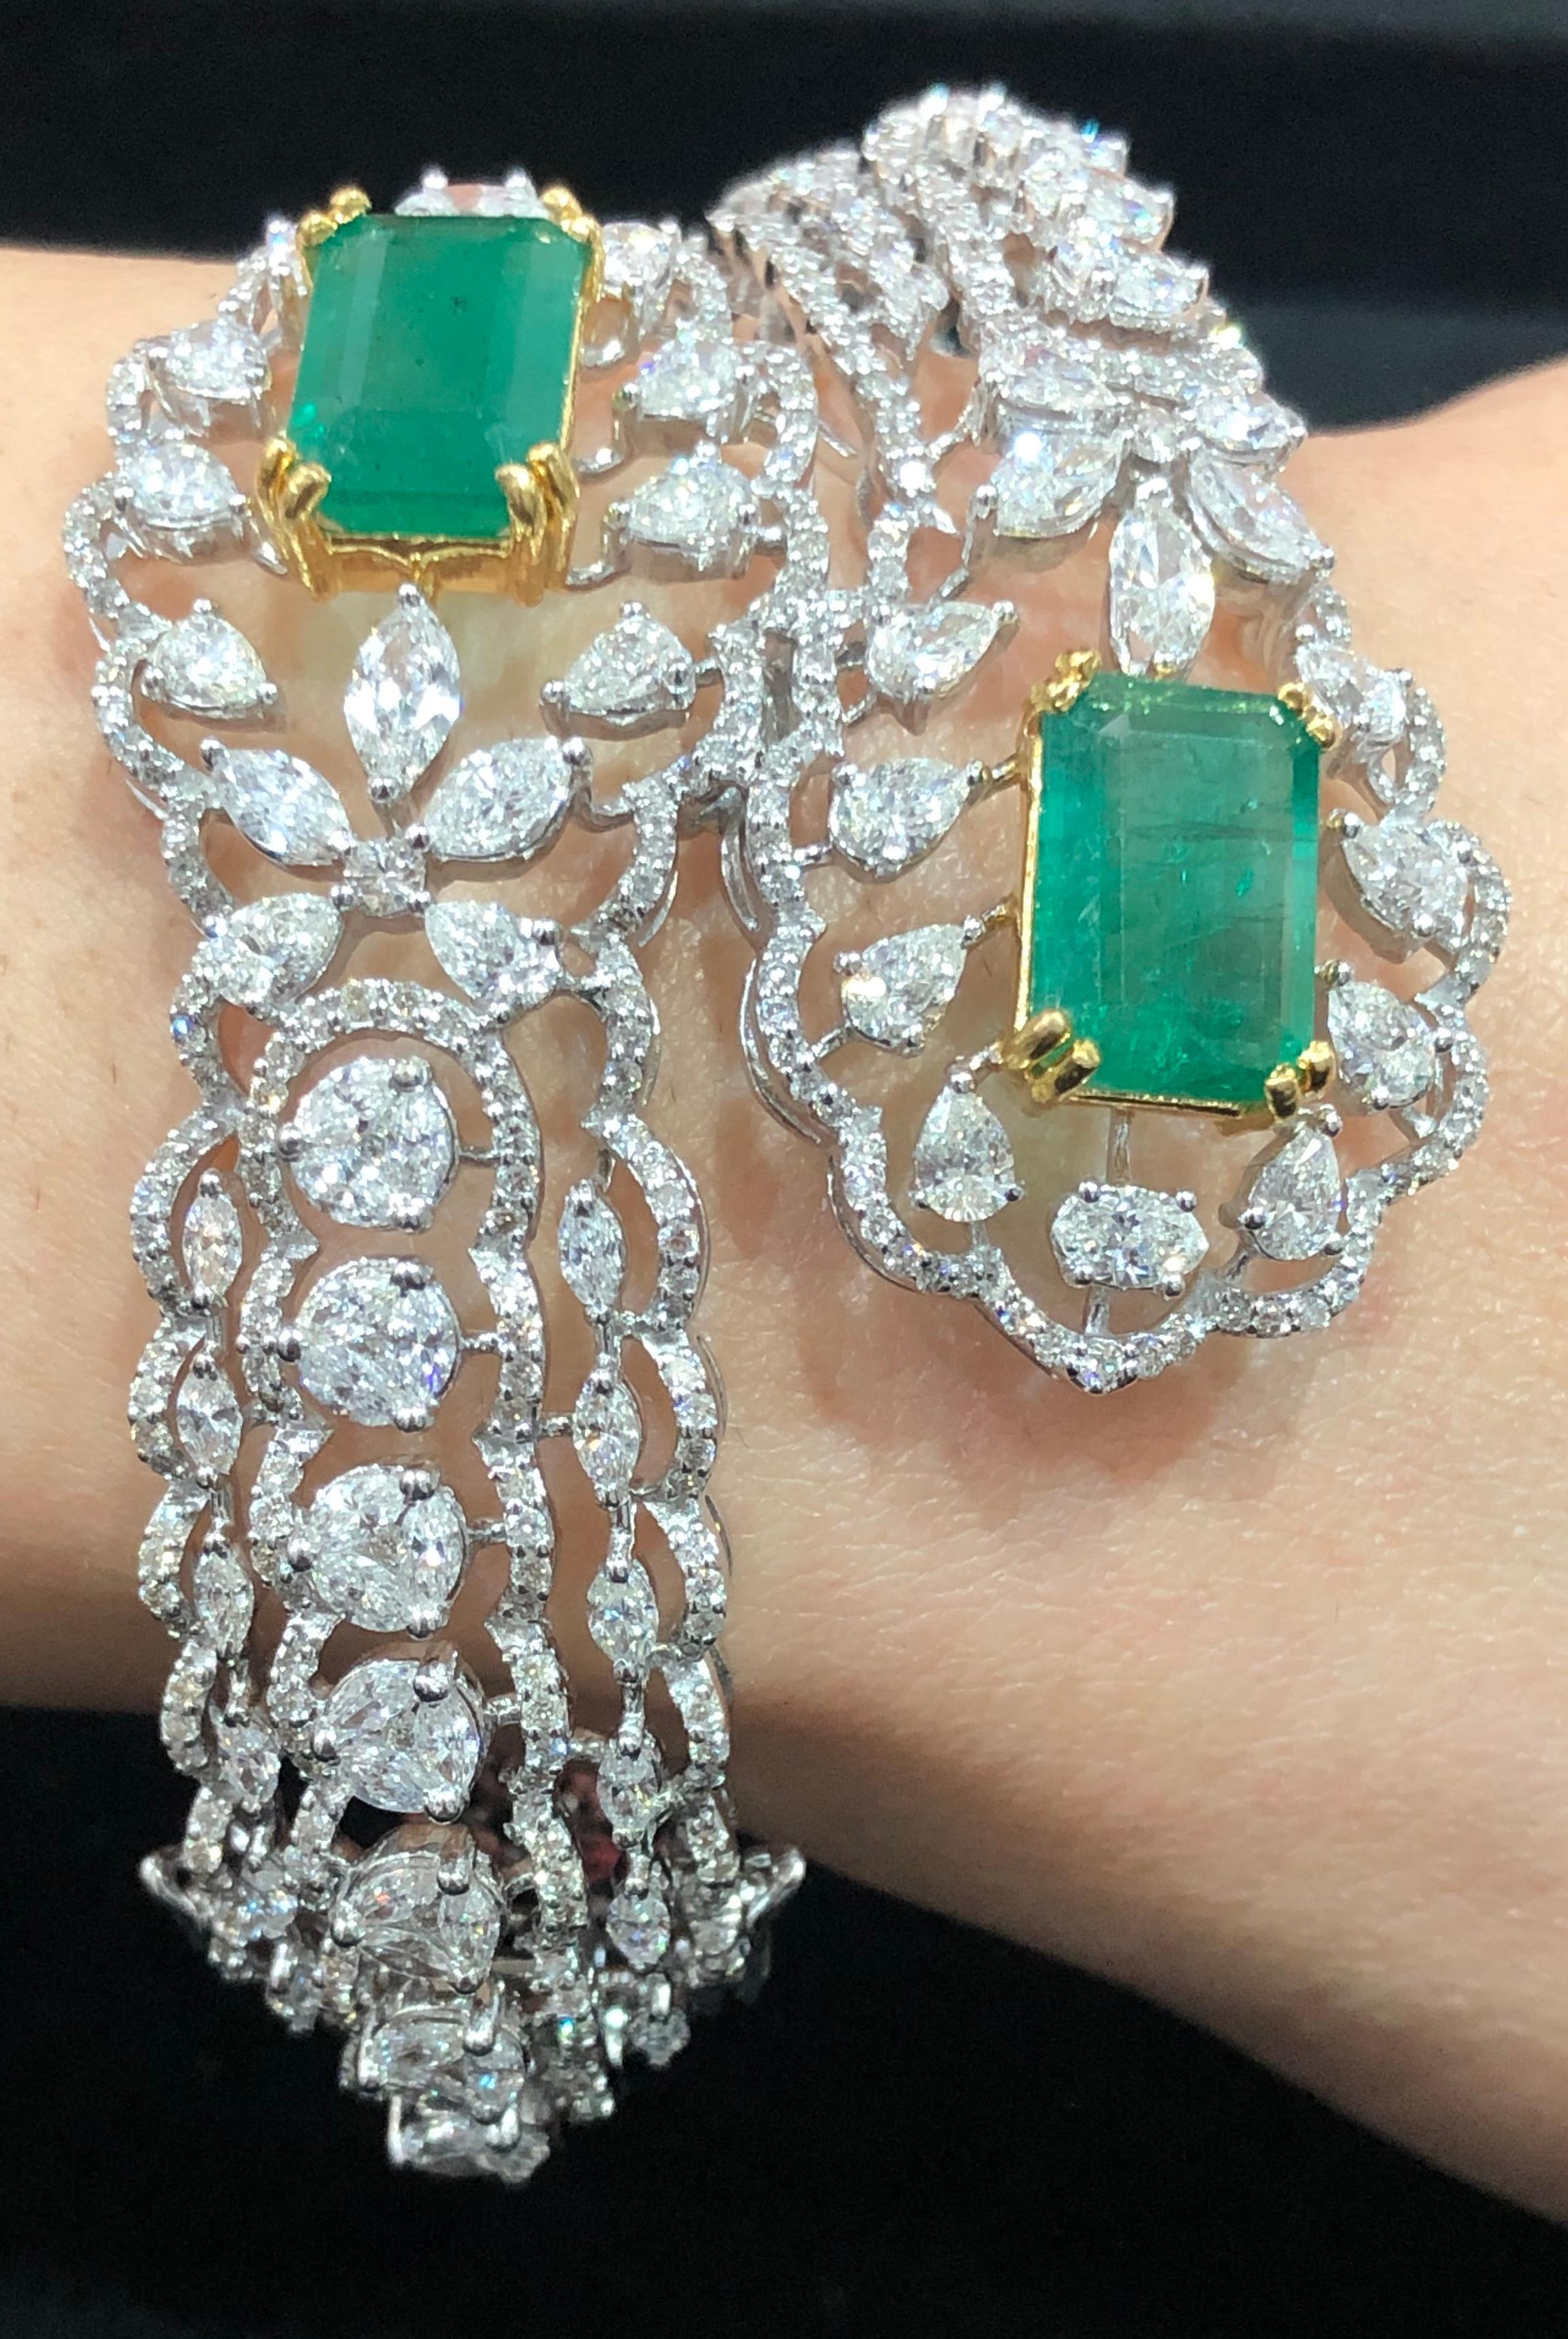 Diamonds: 8.75 carats
Emeralds: 6.87 carats
18kt Gold - 44.760 Net grams
Ref No: DBR-BHI

Oval shaped openable cuff

A woman defines her own beauty. all it needs is a touch of handcrafted exquisite jewellery. We promise you just that with this